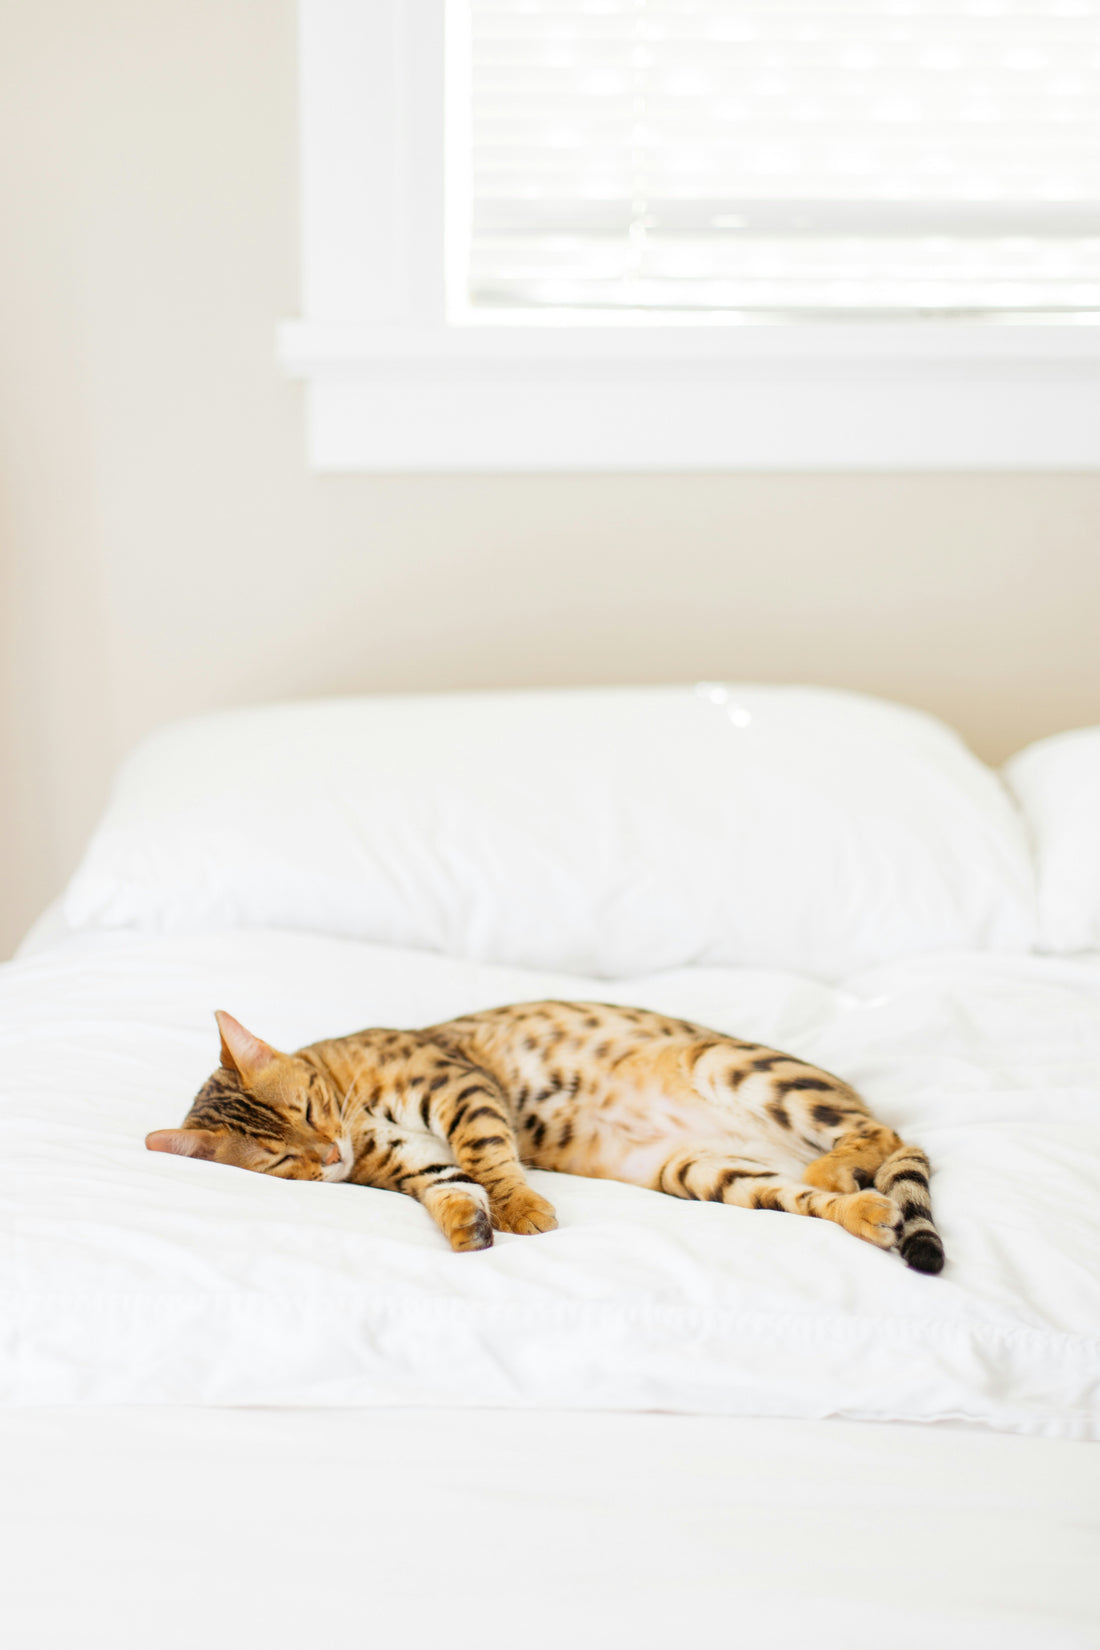 7 Steps to Creating the Purrfect Spaw Day for Your Cat